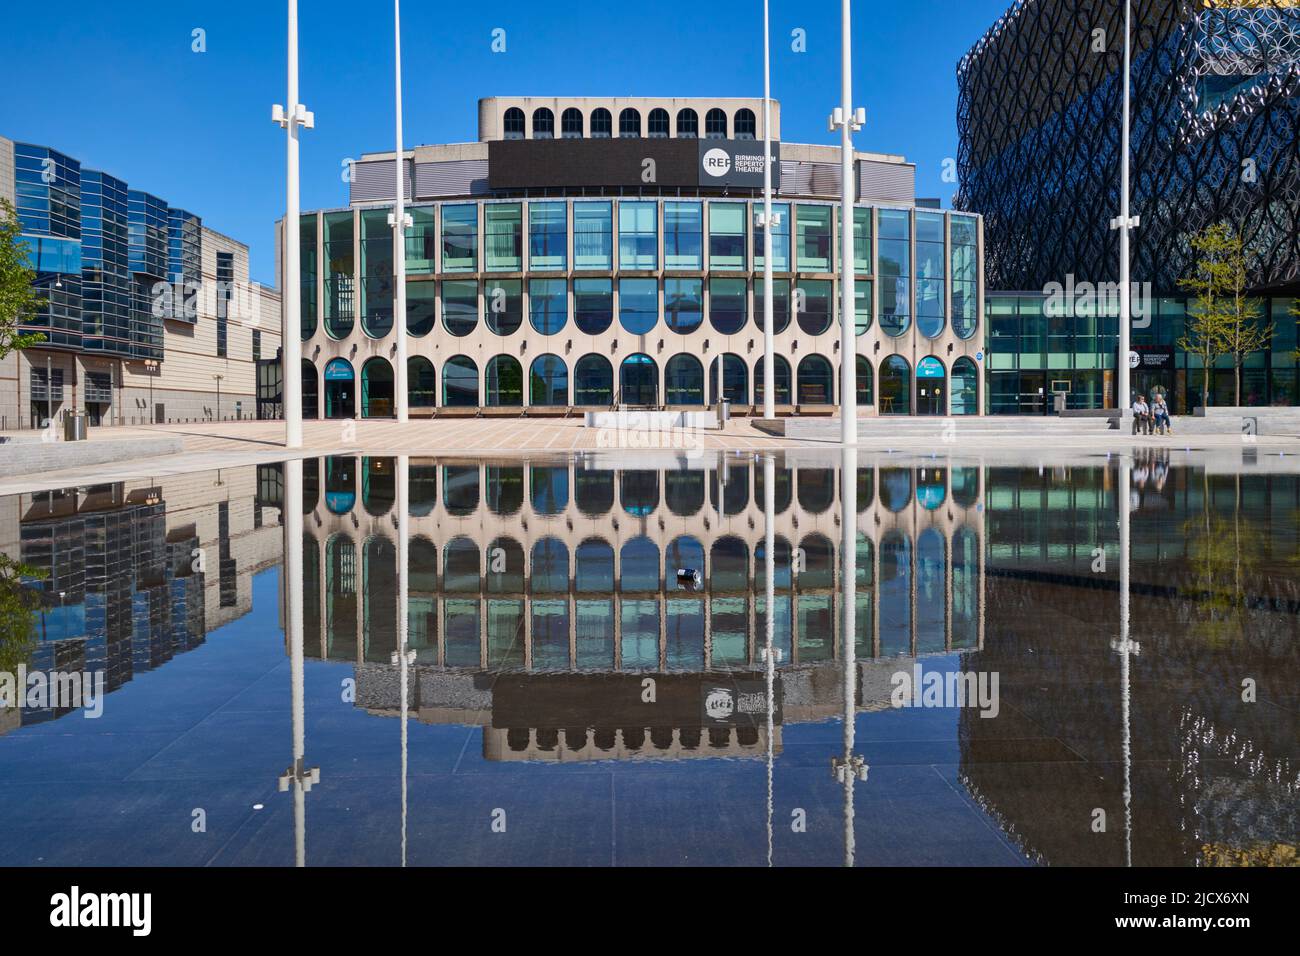 Centenary Square, The International Convention Centre, Repertory Theatre and Library, Birmingham, West Midlands, England, United Kingdom, Europe Stock Photo